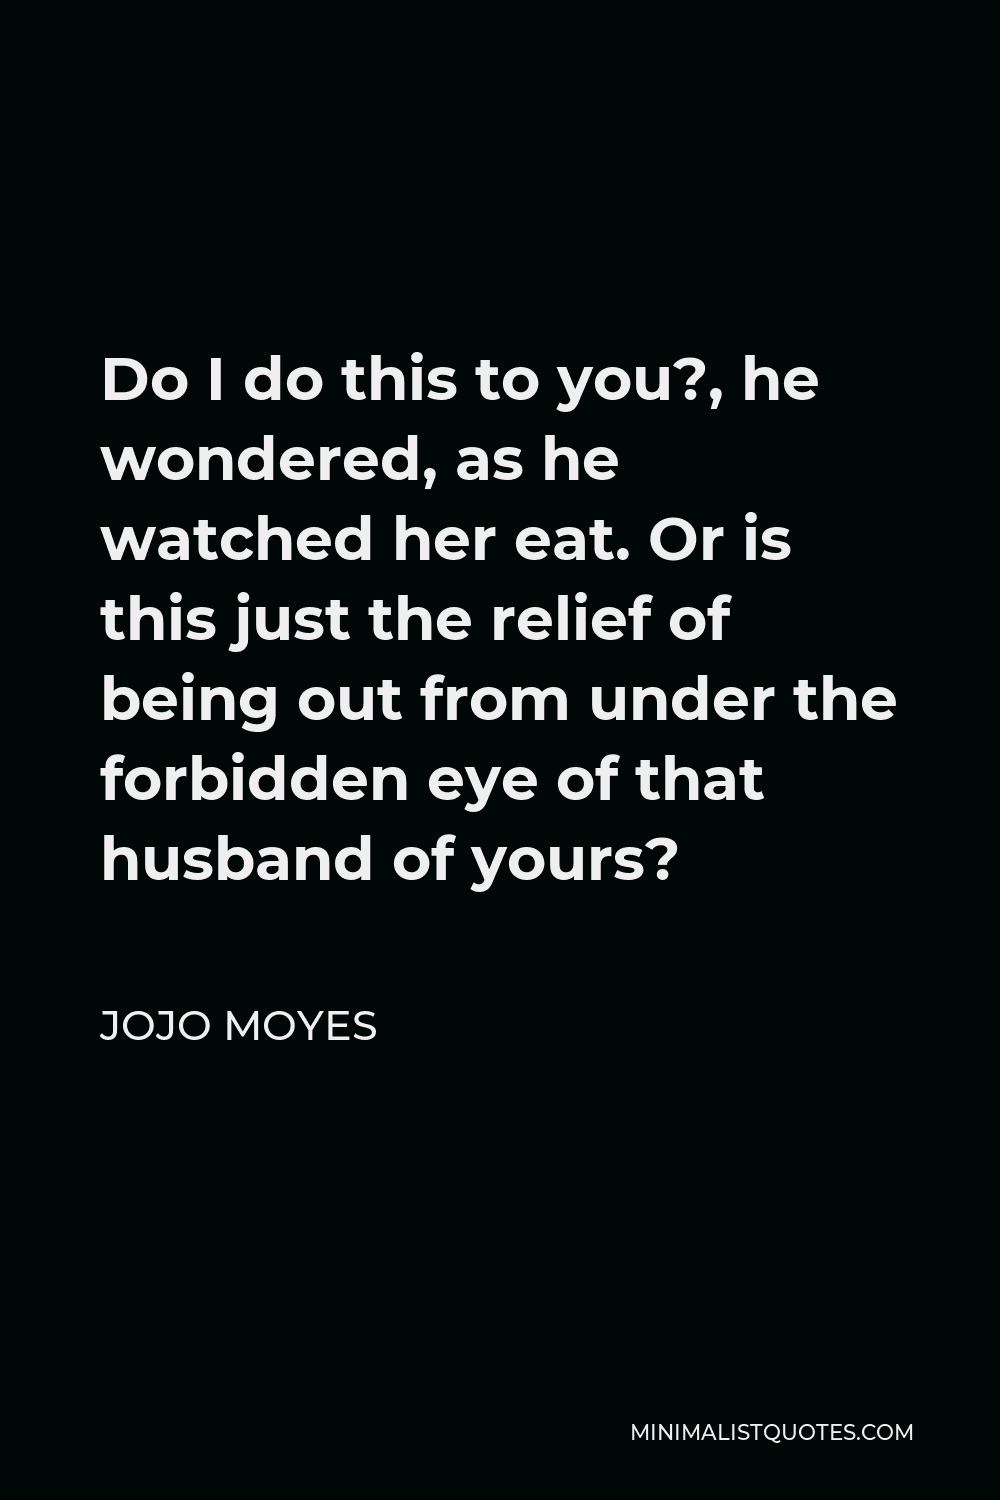 Jojo Moyes Quote - Do I do this to you?, he wondered, as he watched her eat. Or is this just the relief of being out from under the forbidden eye of that husband of yours?